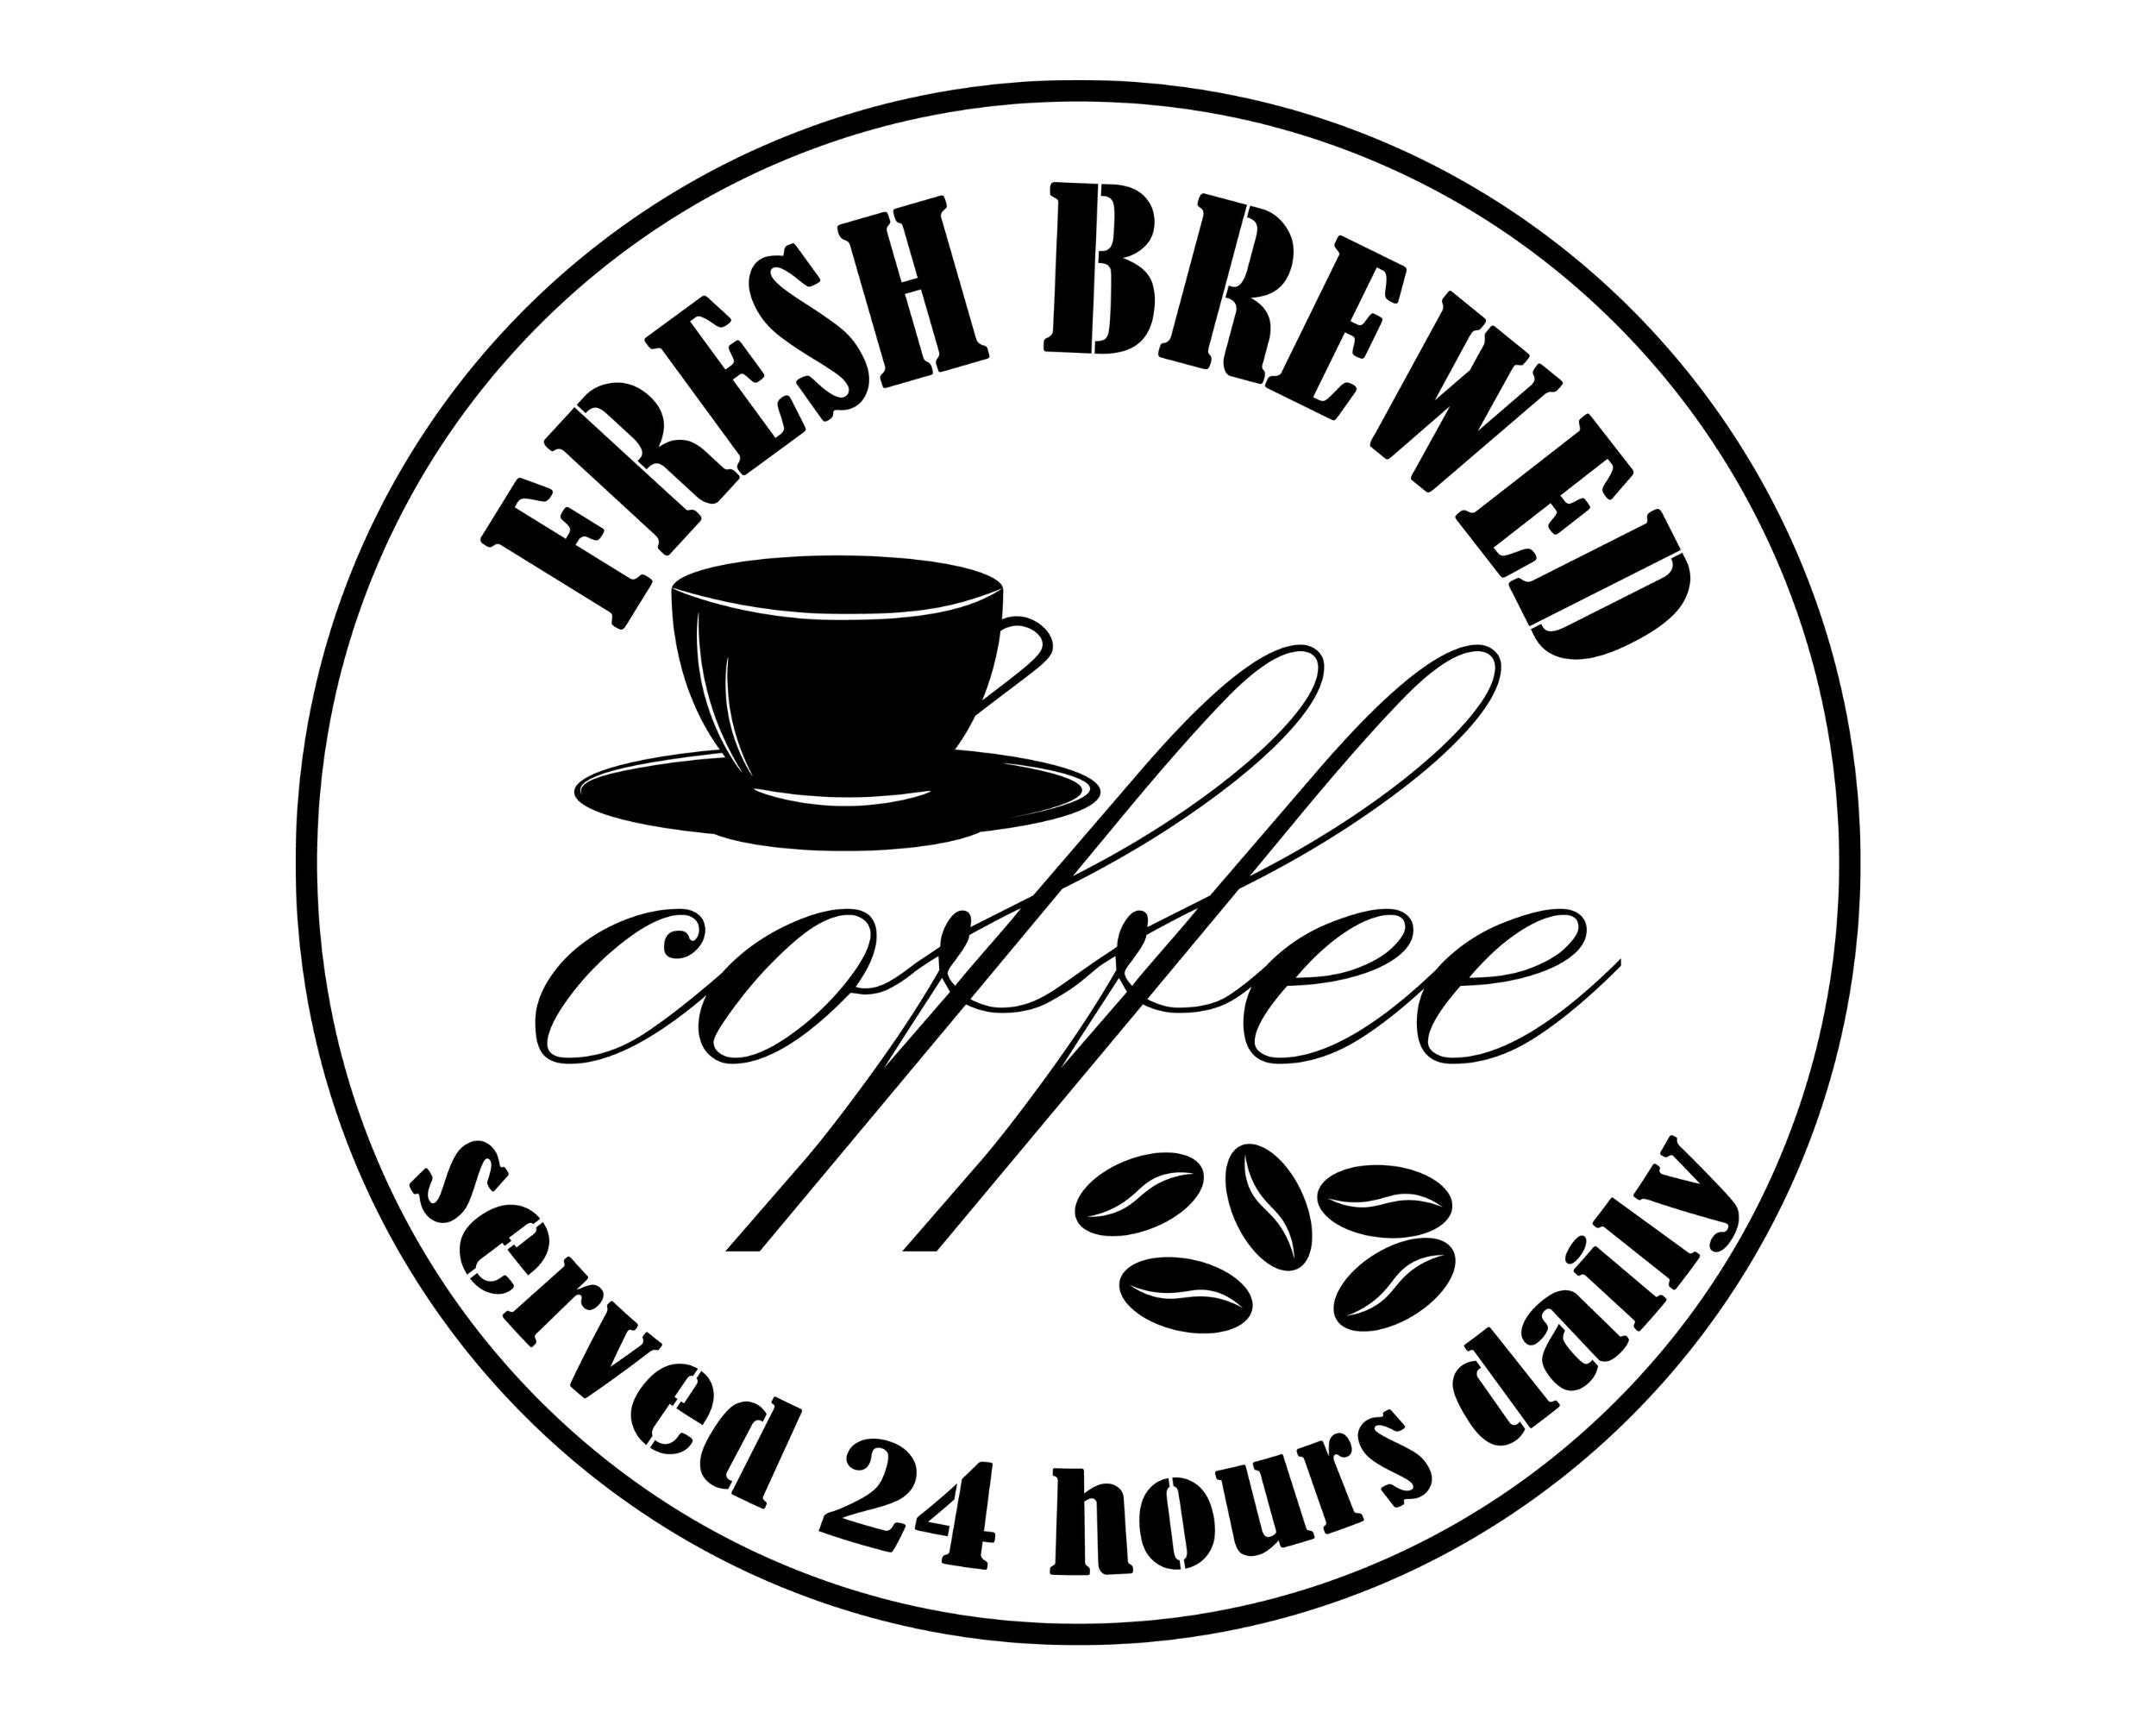 Download Coffee sign for kitchen Fresh brewed coffee svg | Etsy